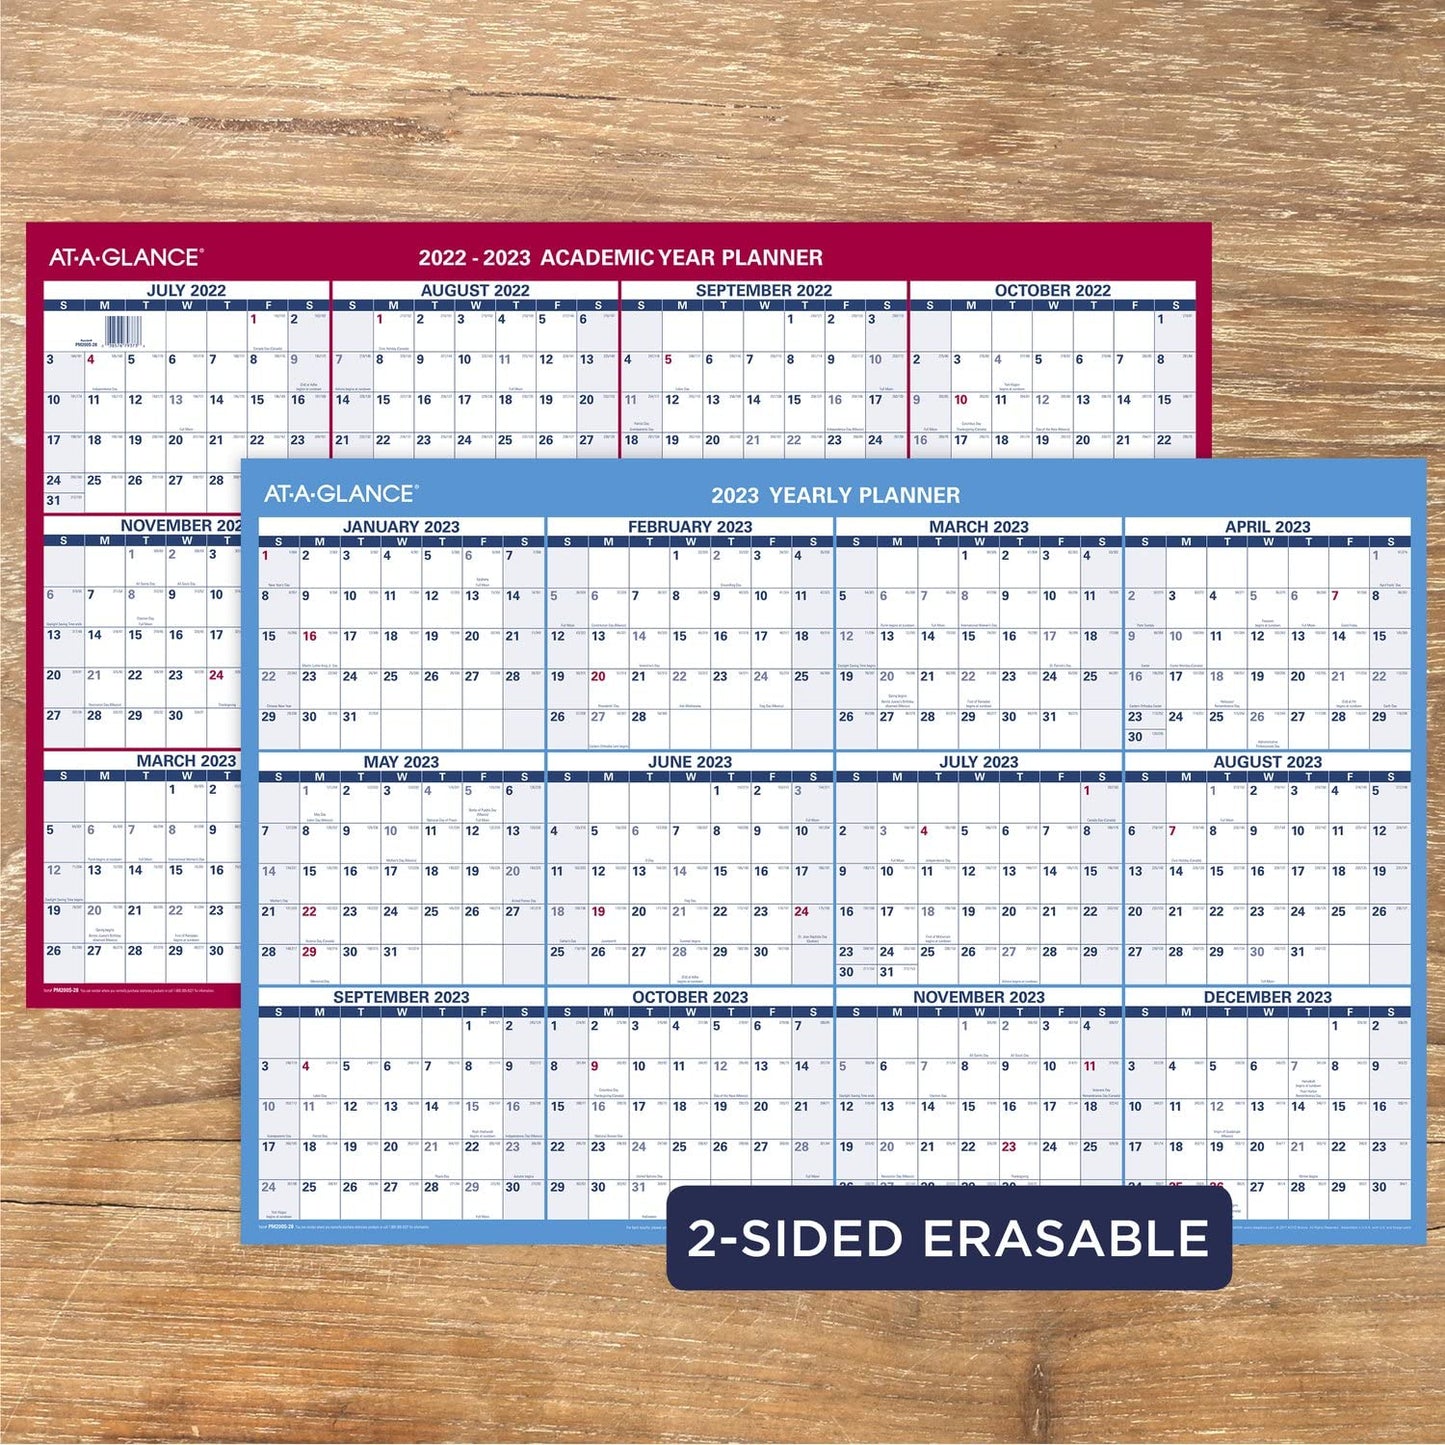 AT-A-GLANCE 2022-2024 Erasable Calendar, Dry Erase Wall Planner, 48" x 32", Extra Large, Academic & Regular Year, Double Sided, Horizontal (PM326S2824)